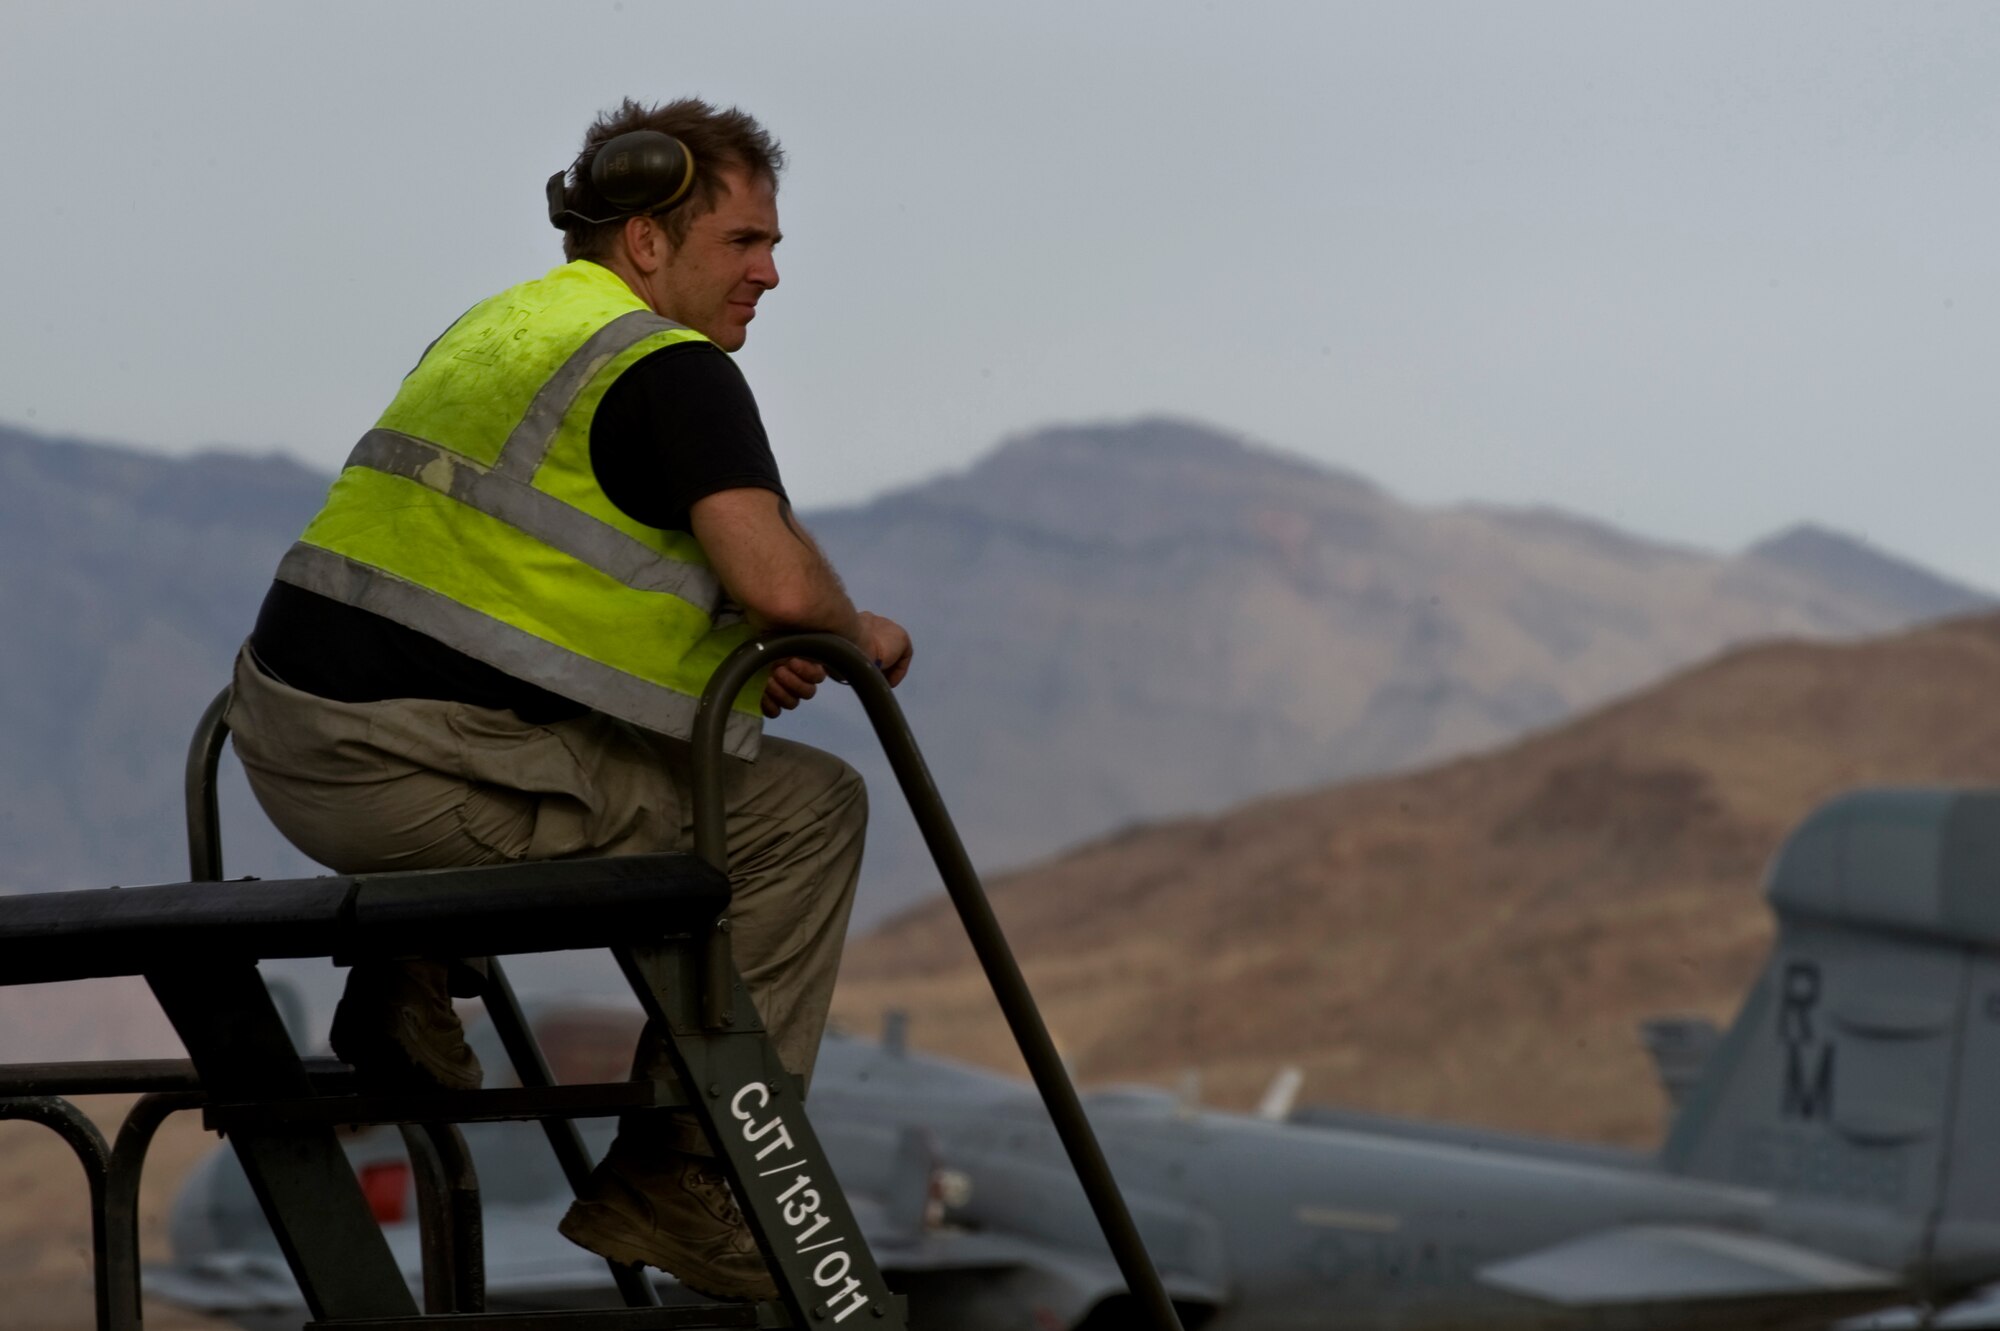 Royal Air Force of the United Kingdom Senior Aircraftsman, Chris Mather, 2nd Army Cooperation Squadron, avionics technician, RAF Marham, watches aircraft taxi and launch on the flightline, during Red Flag 12-3 March 5, 2012, at Nellis Air Force Base, Nev. Red Flag is a realistic combat training exercise involving the air forces of the United States and its allies.(U.S. Air Force photo by Airman 1st Class Daniel Hughes)